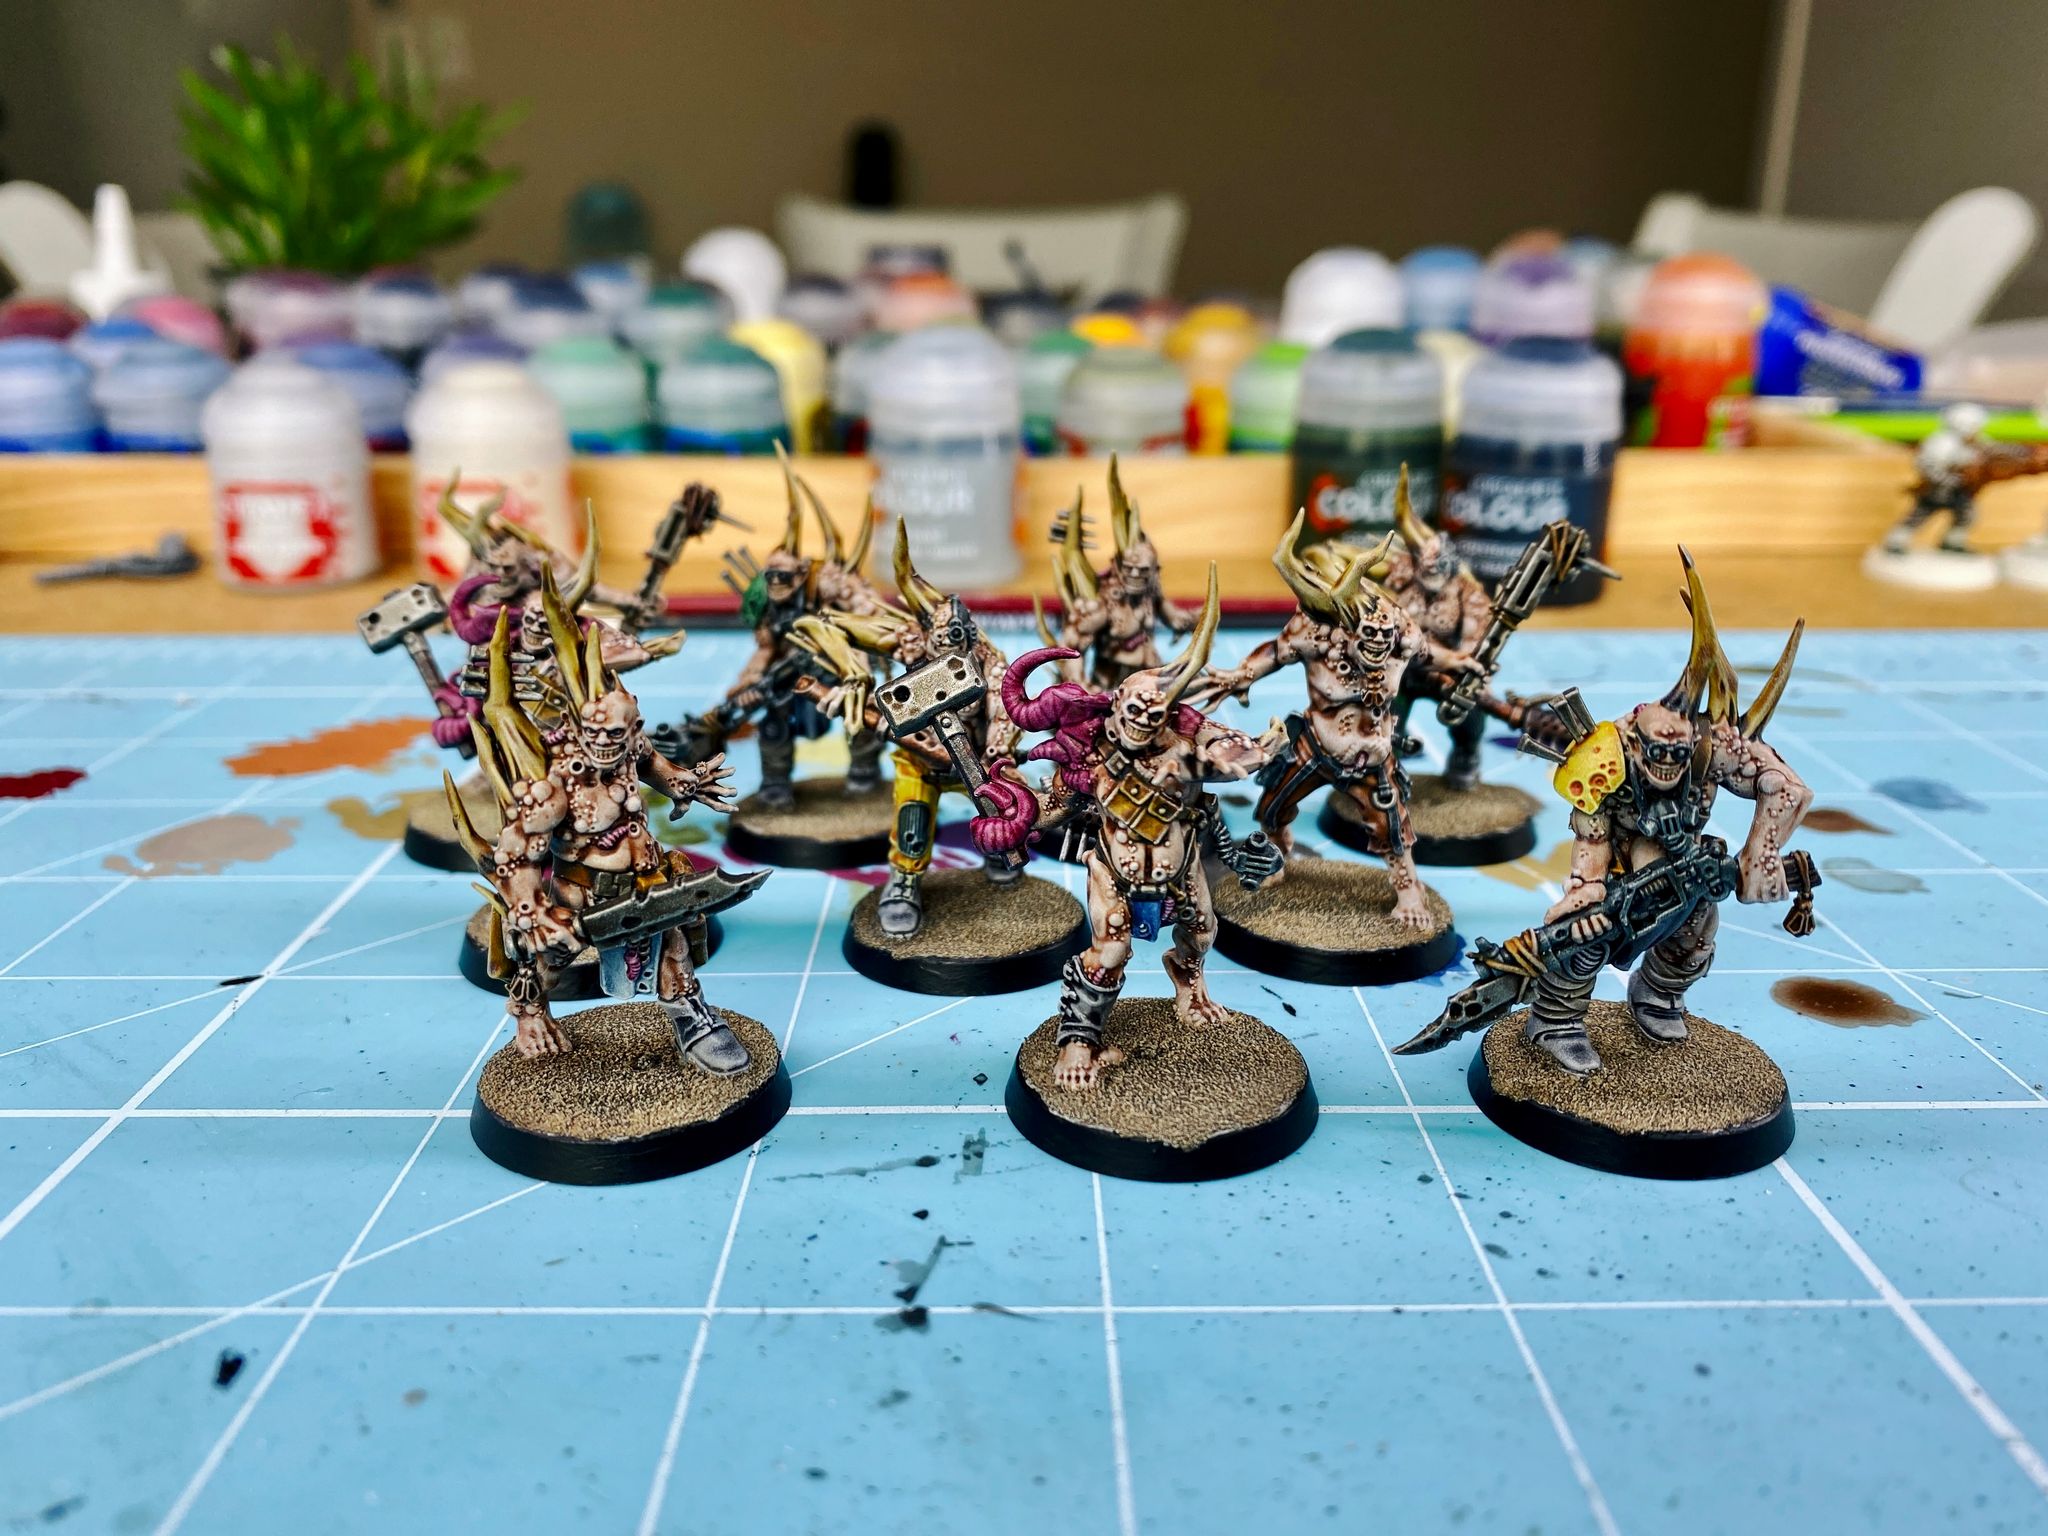 A photo of ten fully-painted Nurgle poxwalkers. They're gross distended zombie-looking things with big bone spikes growing out of them, some have pink tentacles, there's lots of pustules all over their bodies, and they're brandishing all sorts of makeshift pieces of industrial equipment as weapons.